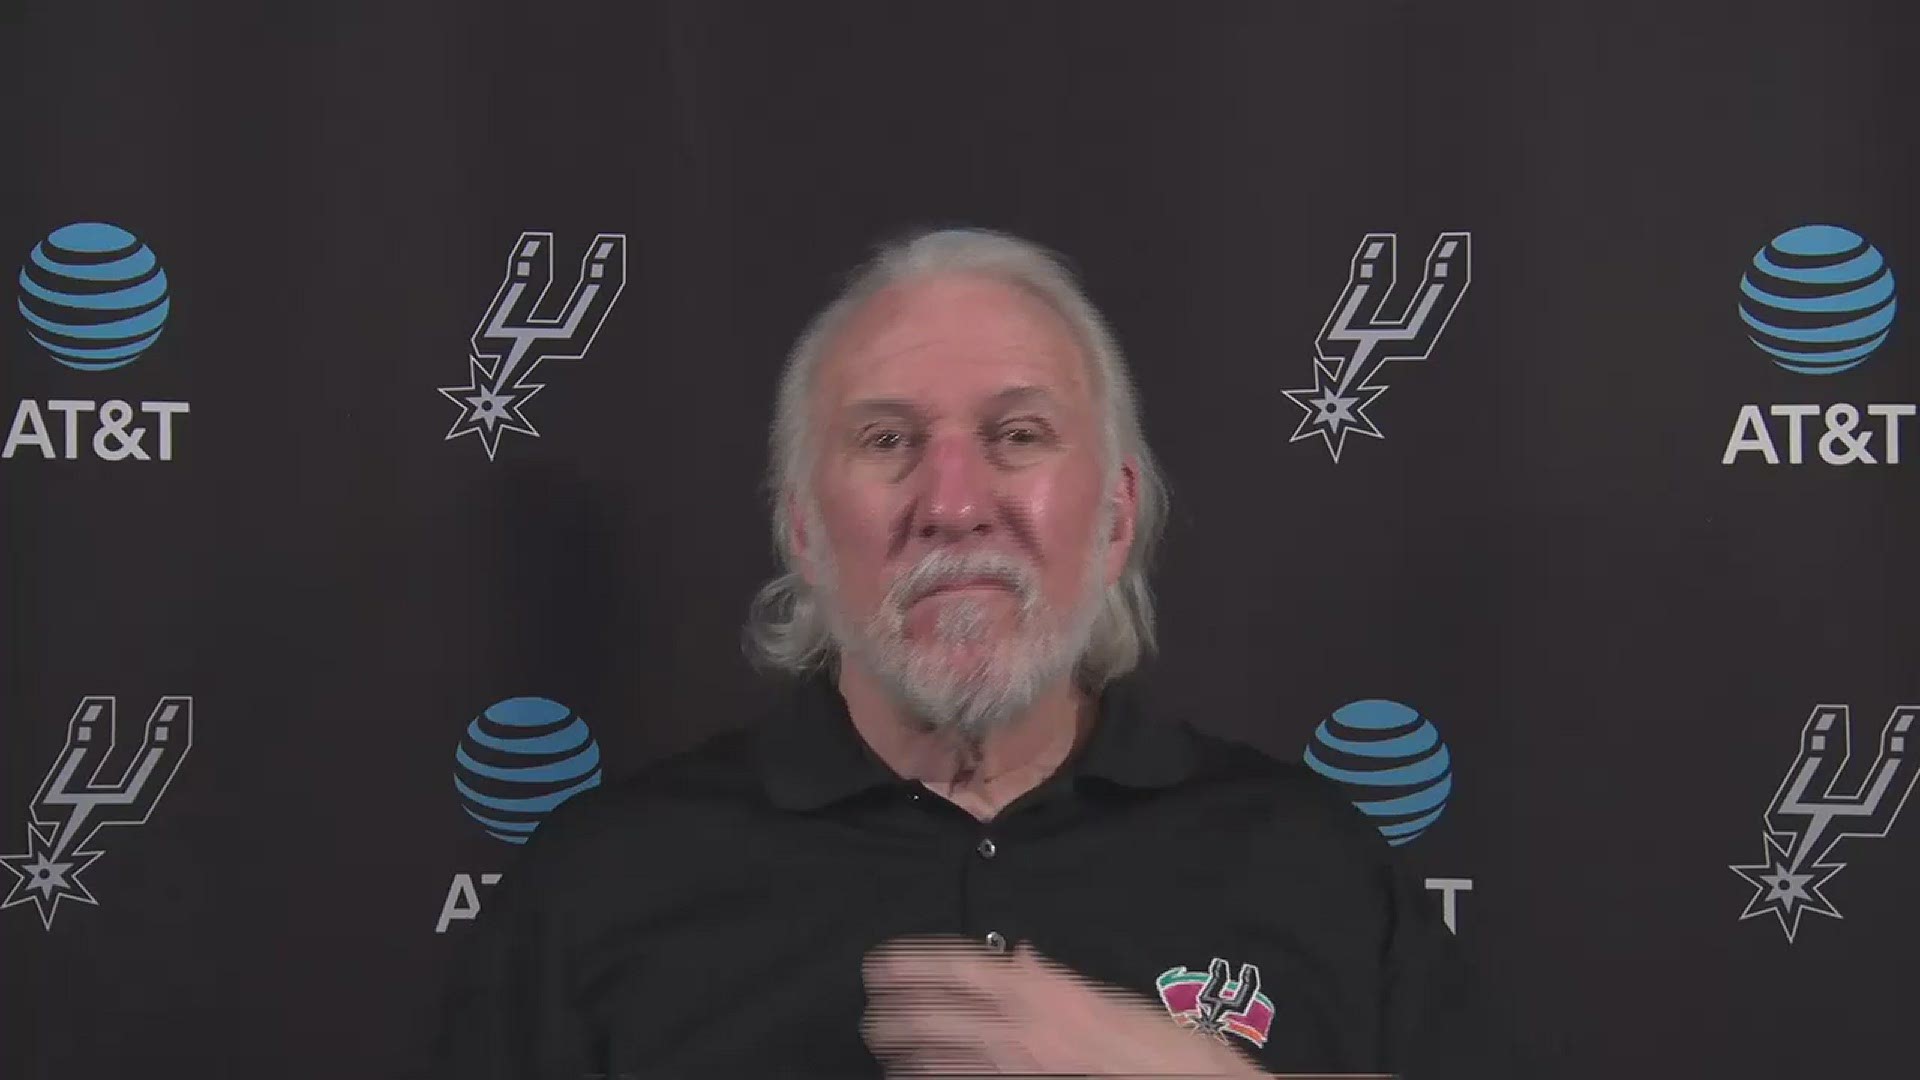 Pop said there were a few too many mistakes, but his guys played hard. He also spoke about LaMarcus Aldridge returning, and coming off the bench.